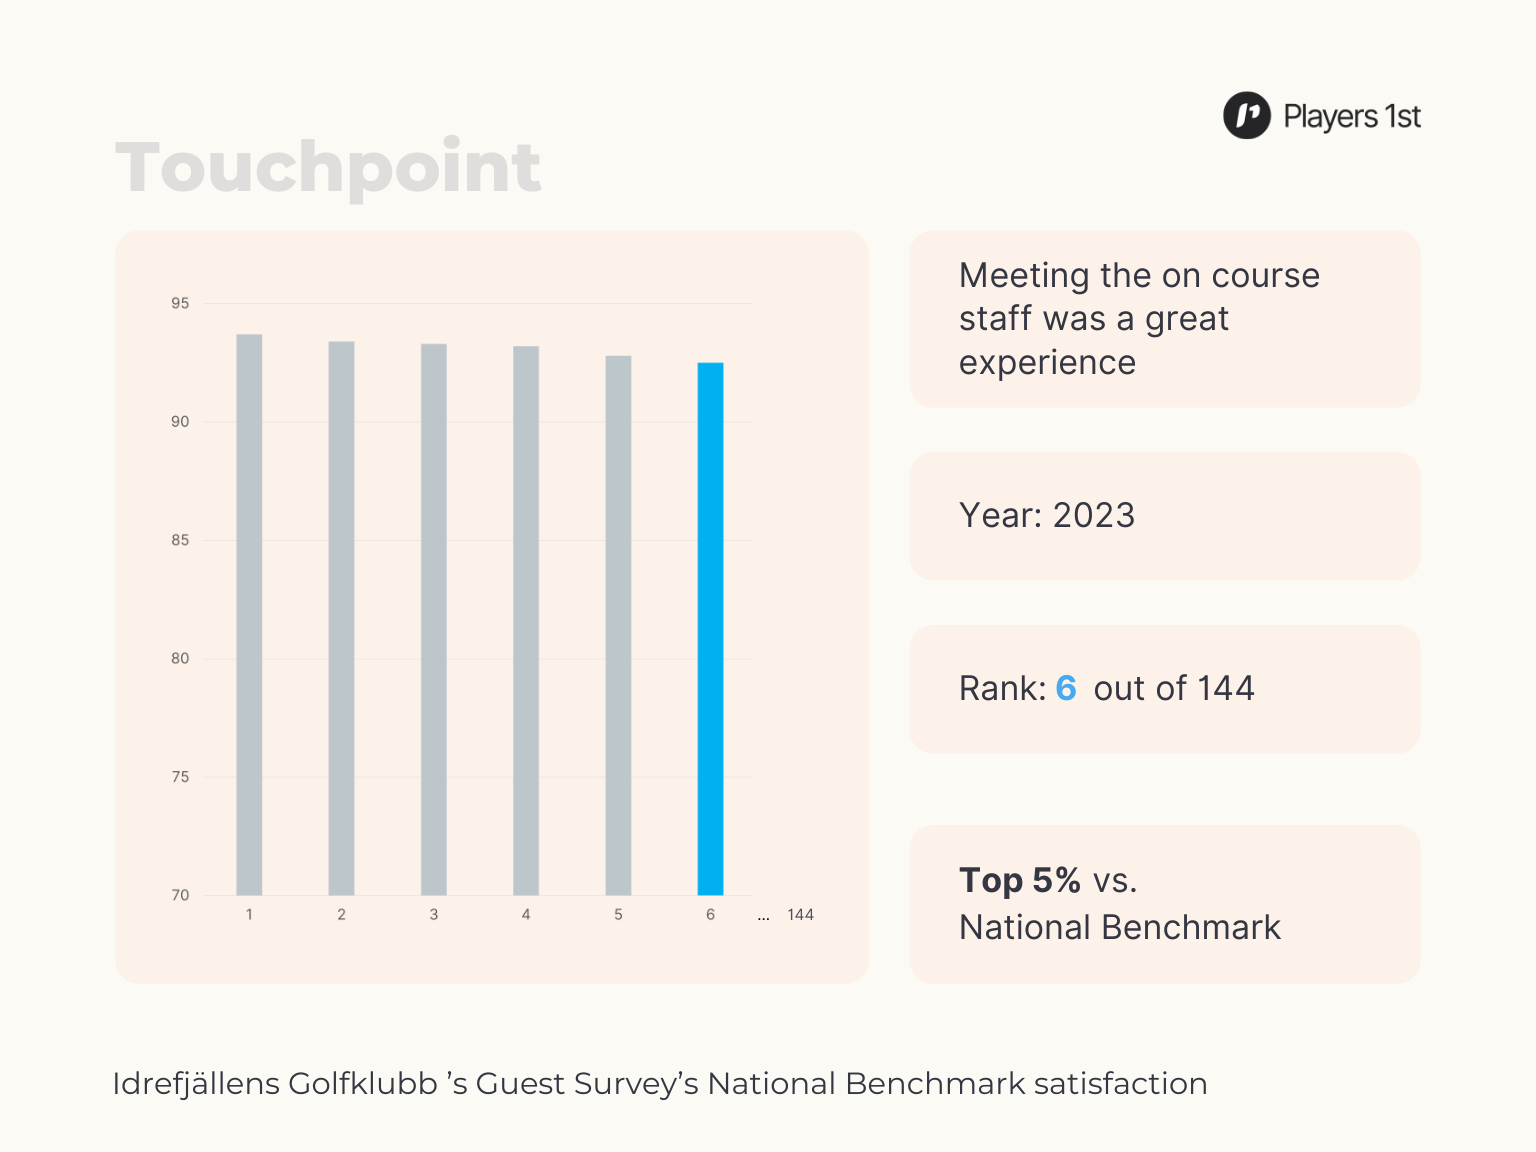 Figure 3: The ranking of Idrefjällens Golfklubb benchmarked against other Players 1st clubs in Sweden. Touchpoint: Meeting the on course staff was a great experience. Source: Players 1st